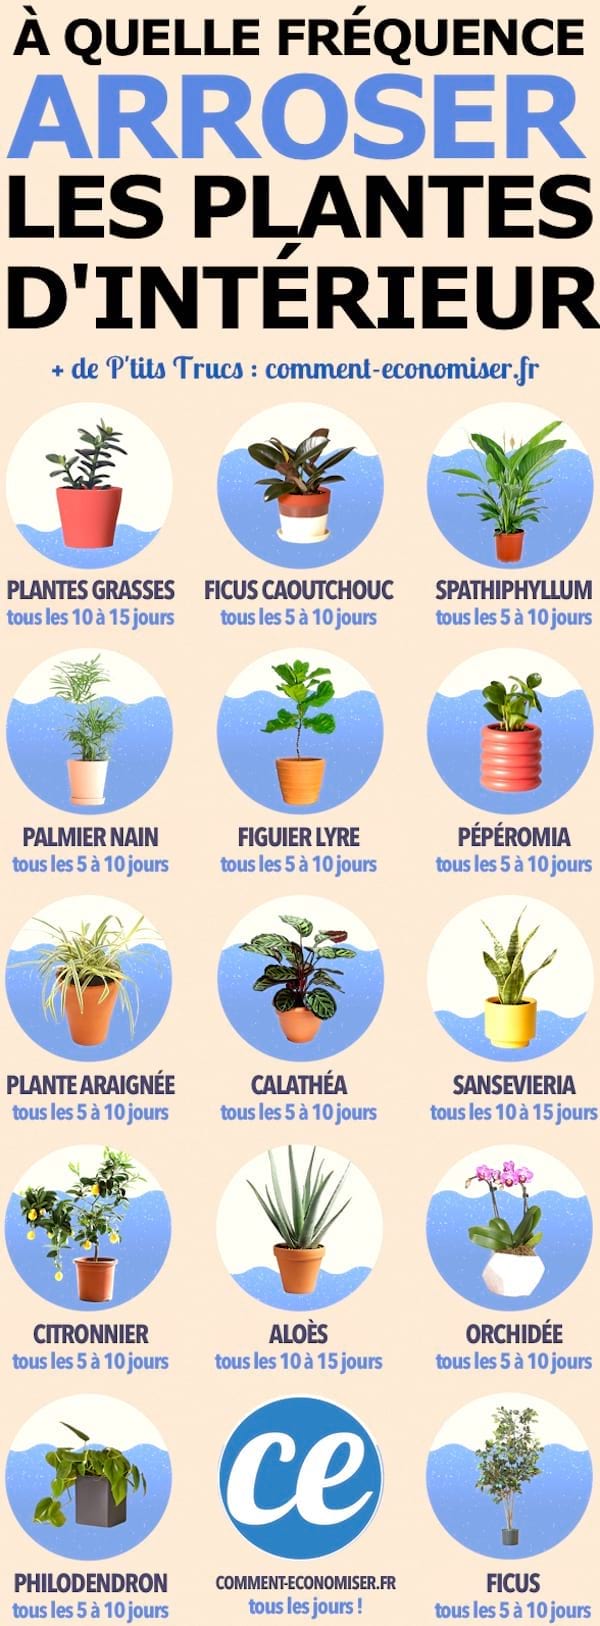 Guide to knowing how often to water your plants